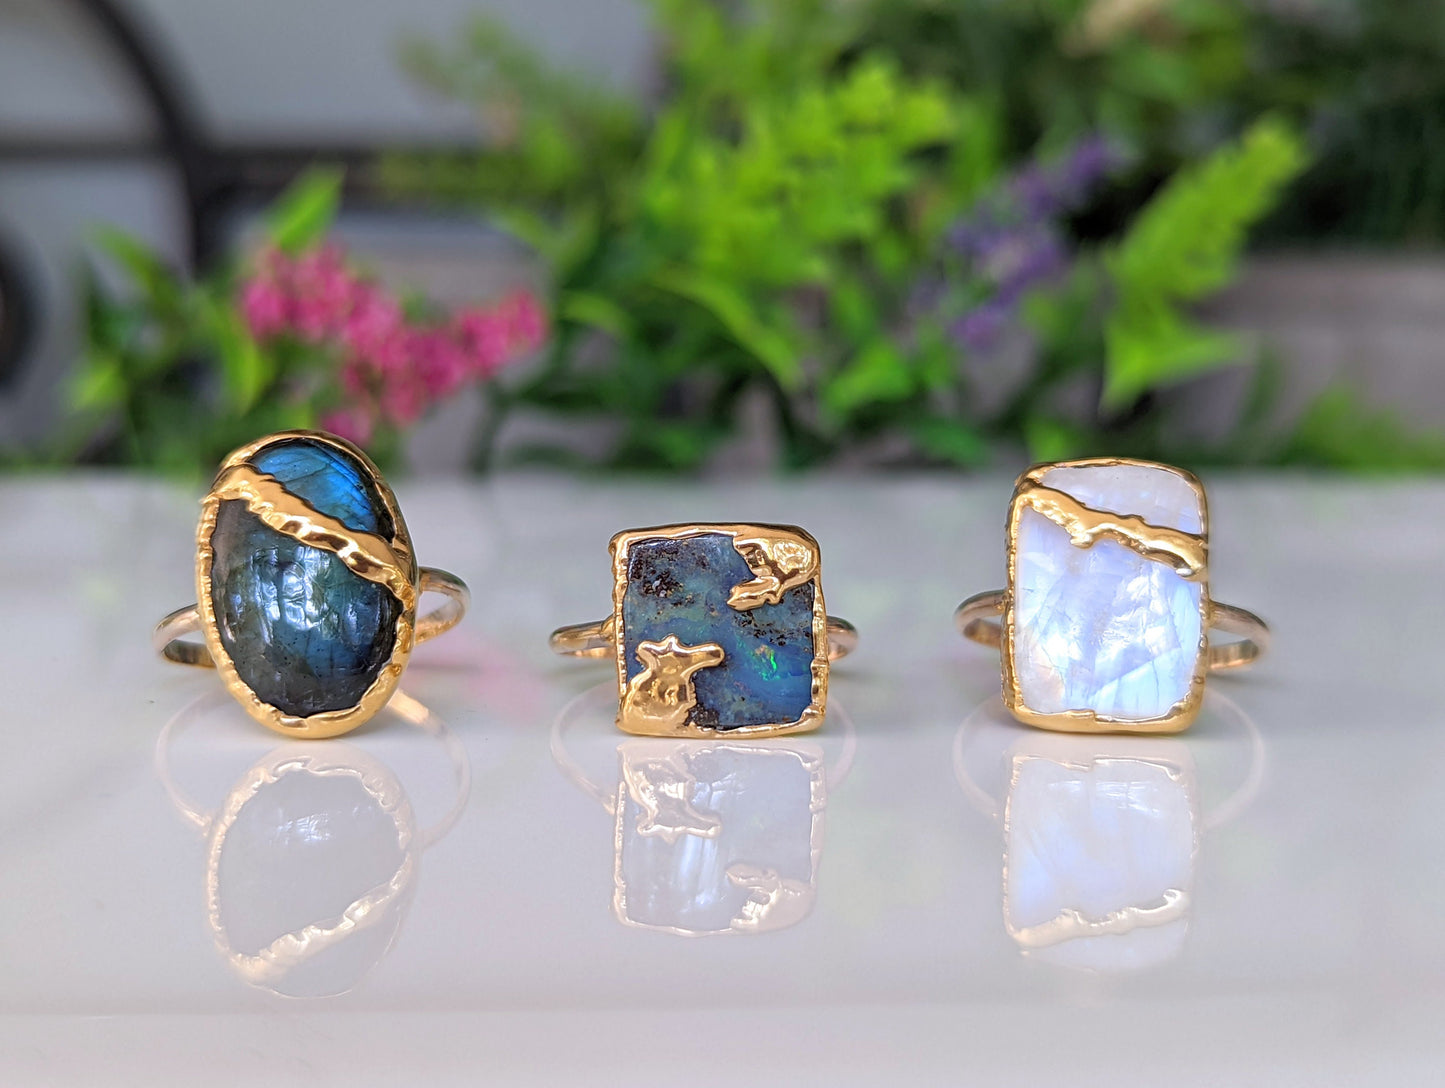 Natural  Gemstone rings in unique Kintsugi style 18k Gold setting